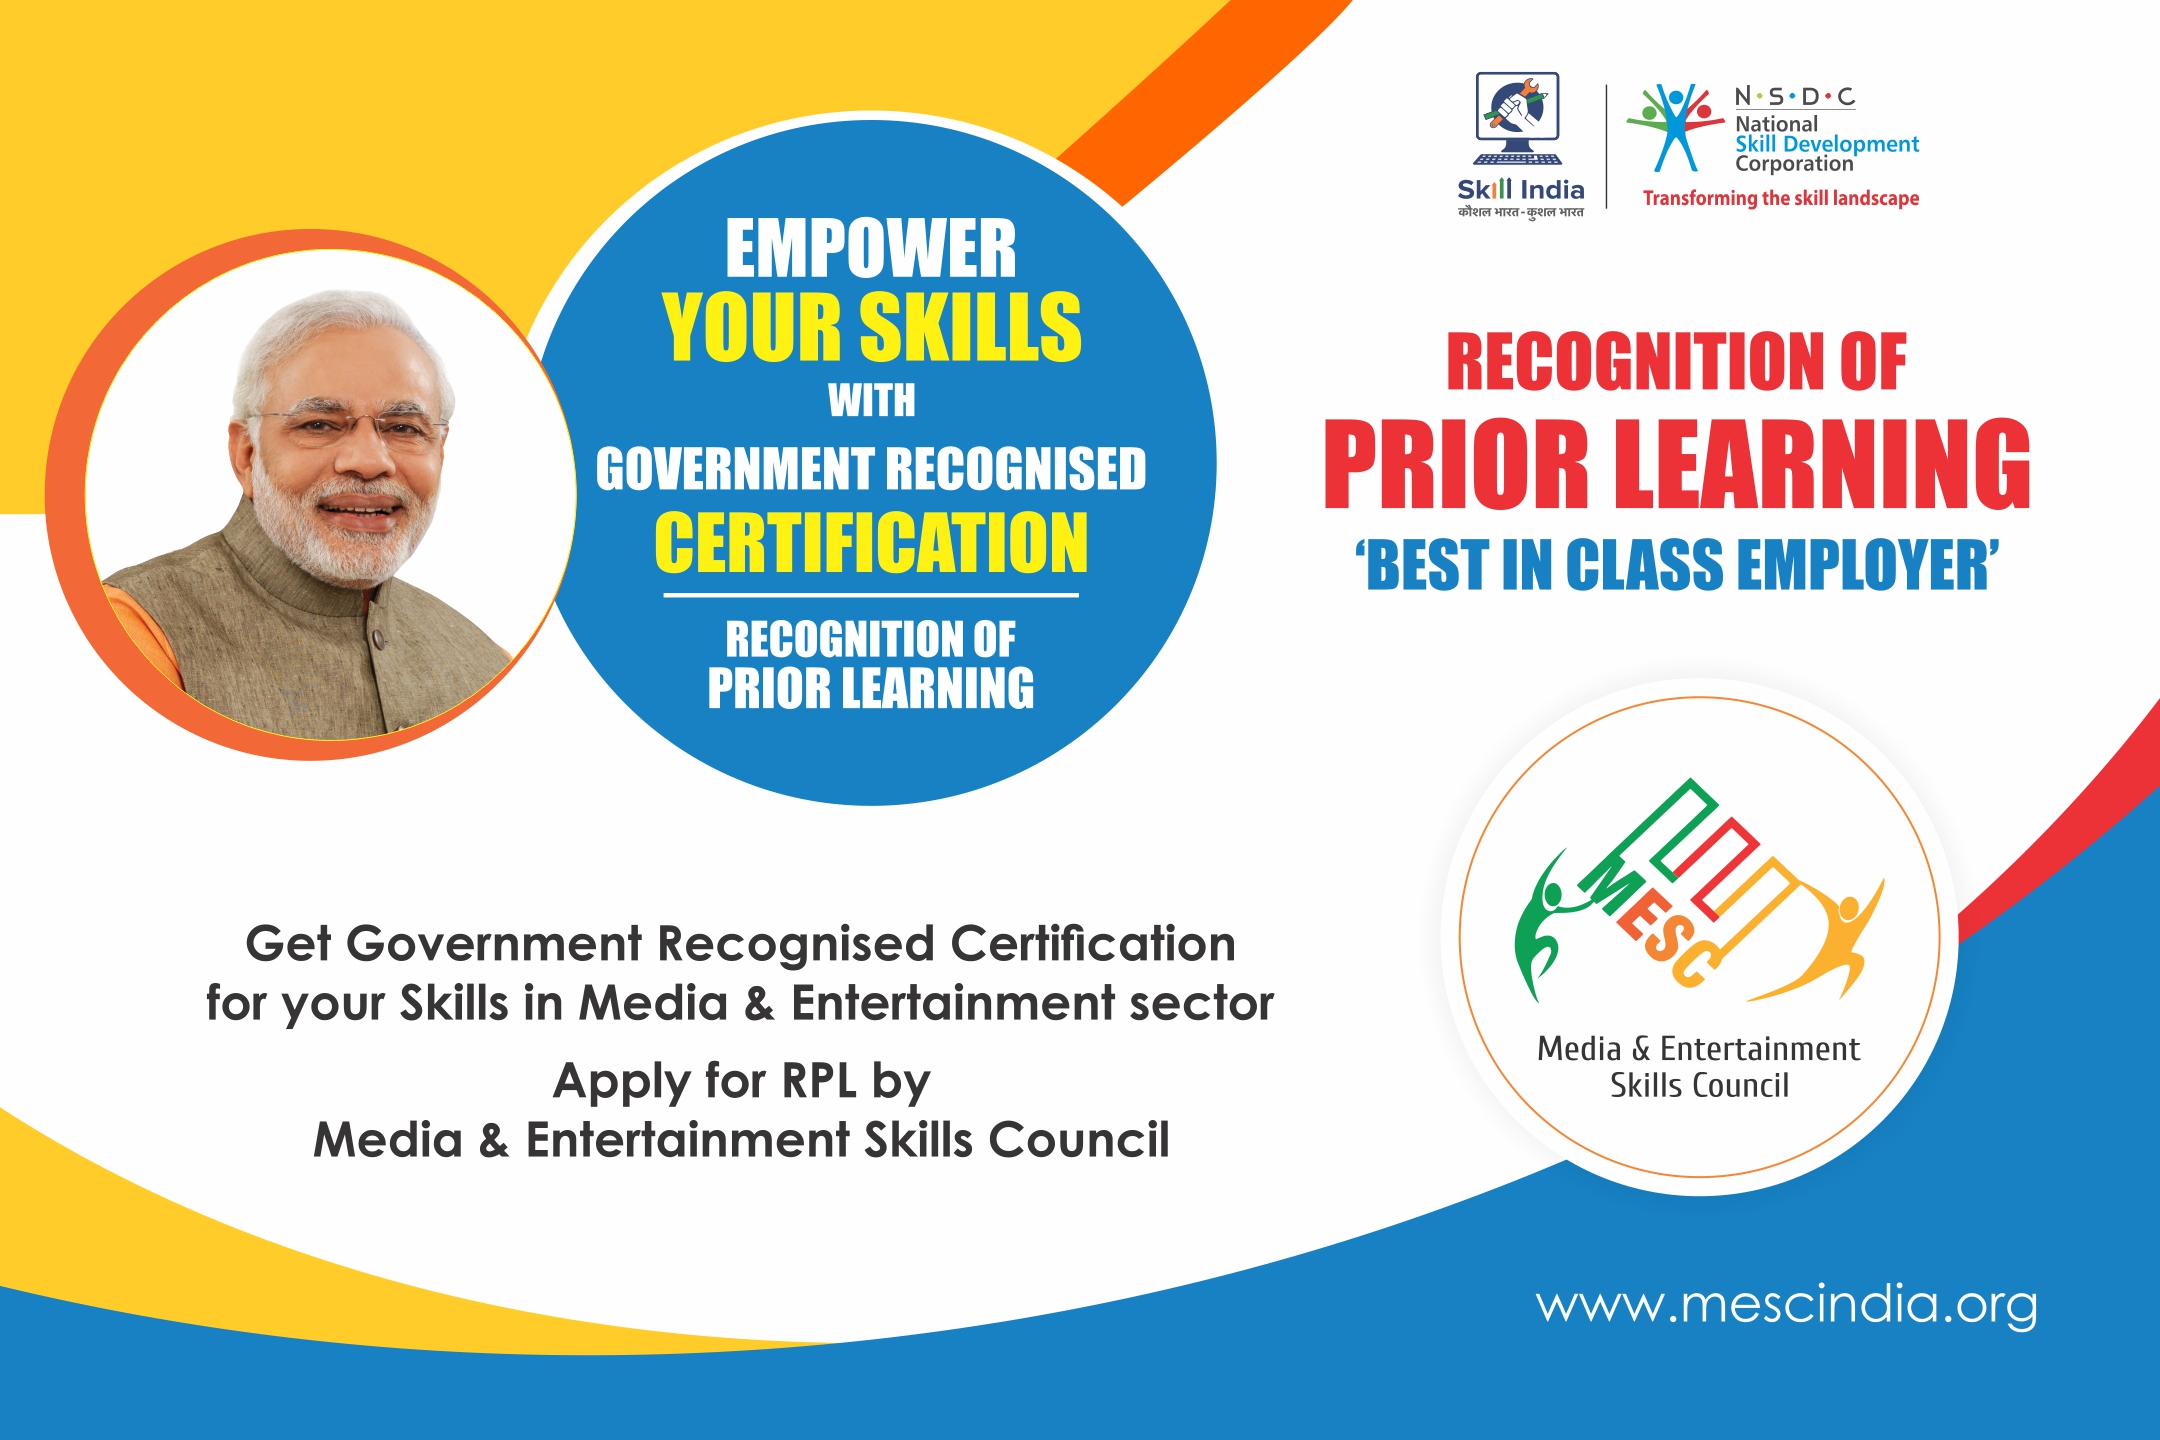 Recognition of Prior Learning (RPL)